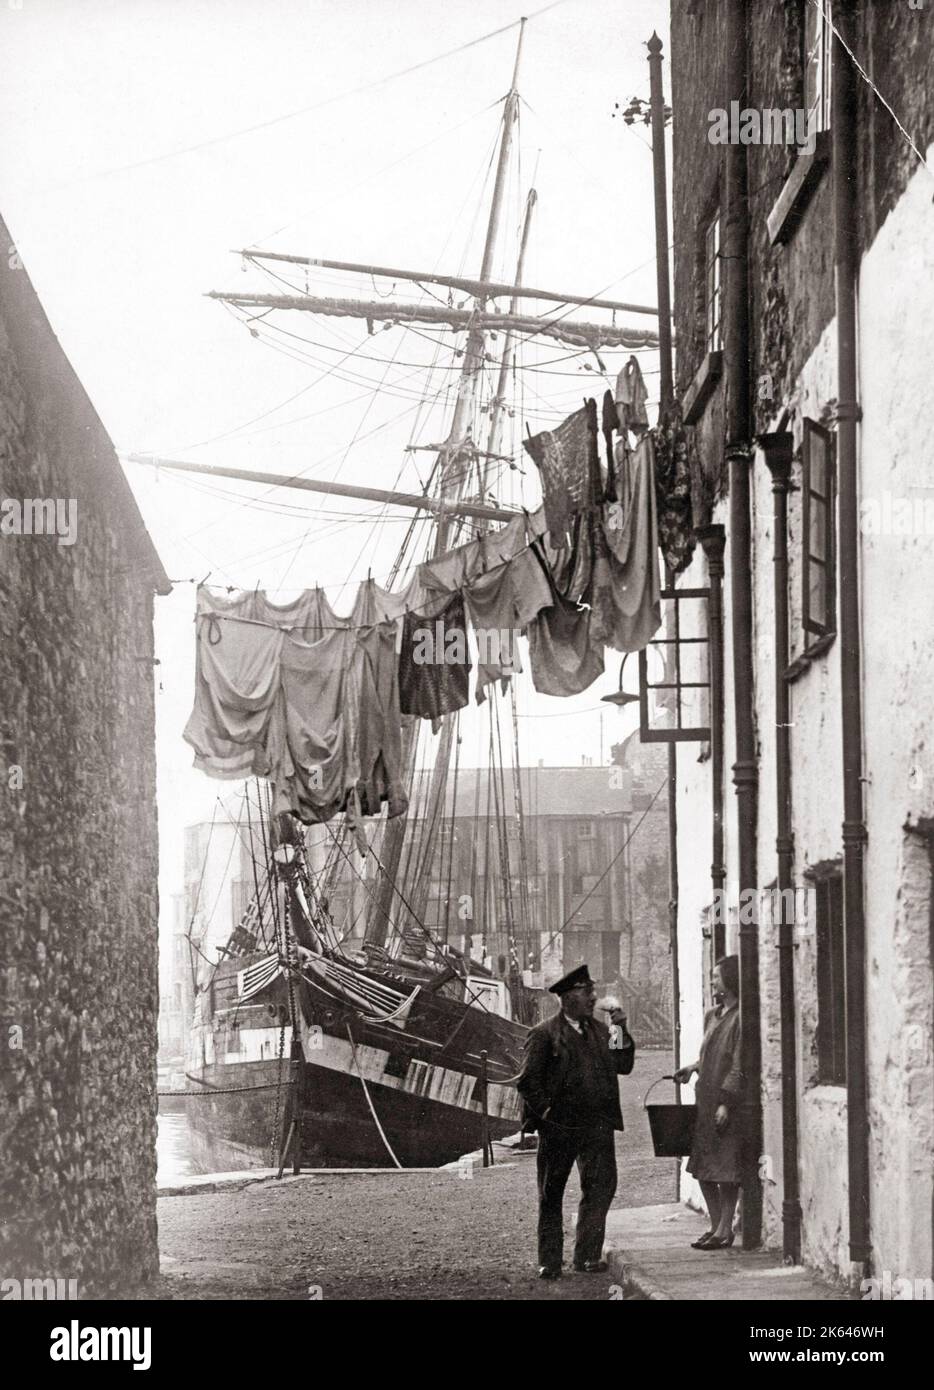 Port scene, with sailor and washing line, UK, 1930's Stock Photo